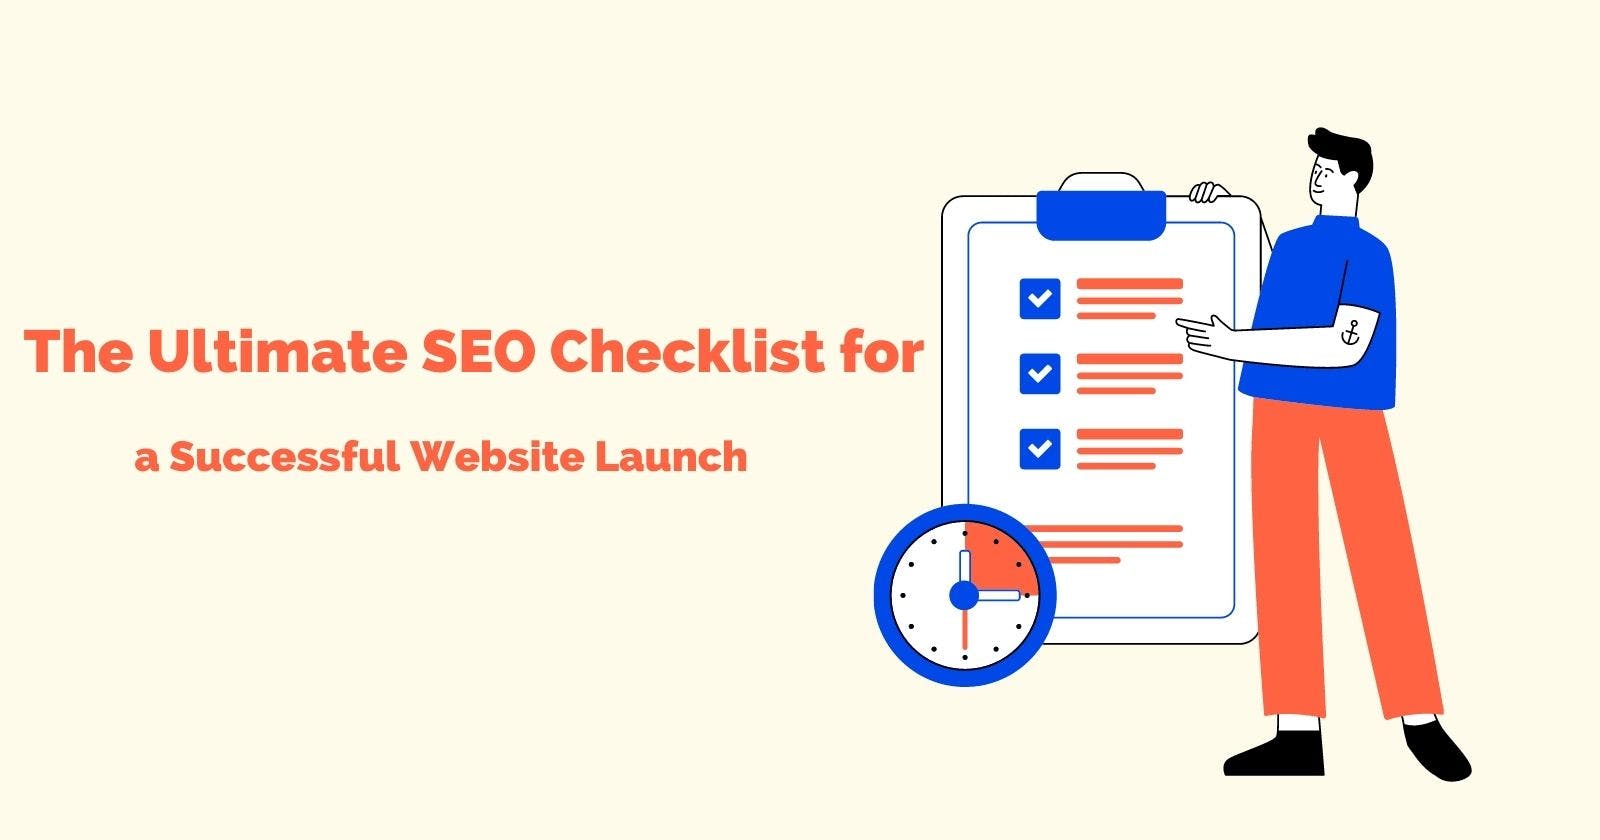 The Ultimate SEO Checklist for a Successful Website Launch